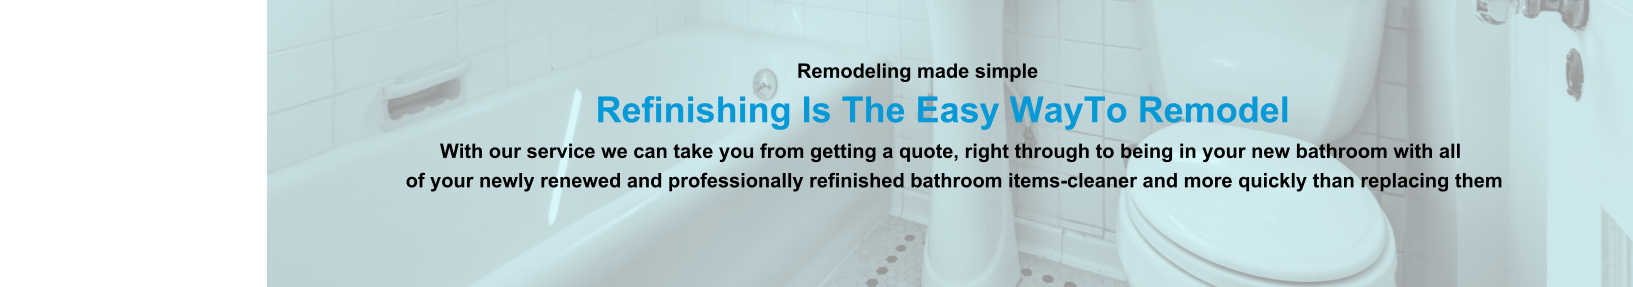 Remodeling made simple                              Refinishing Is The Easy WayTo Remodel                                                                                                                With our service we can take you from getting a quote, right through to being in your new bathroom with all                                                                          of your newly renewed and professionally refinished bathroom items-cleaner and more quickly than replacing them